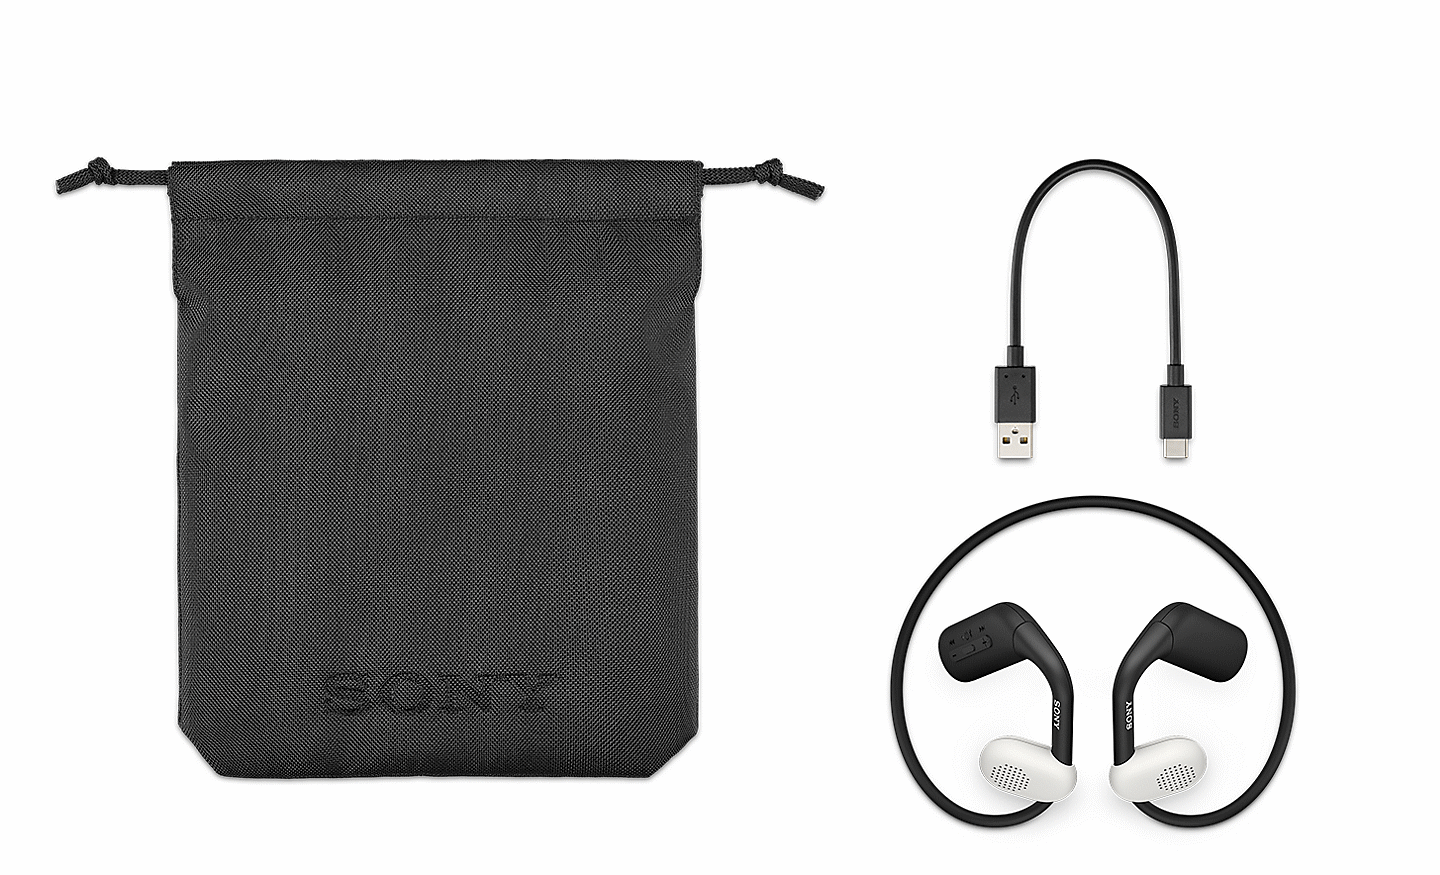 Image of the Sony Float Run headphones, a charging cable and a carry pouch